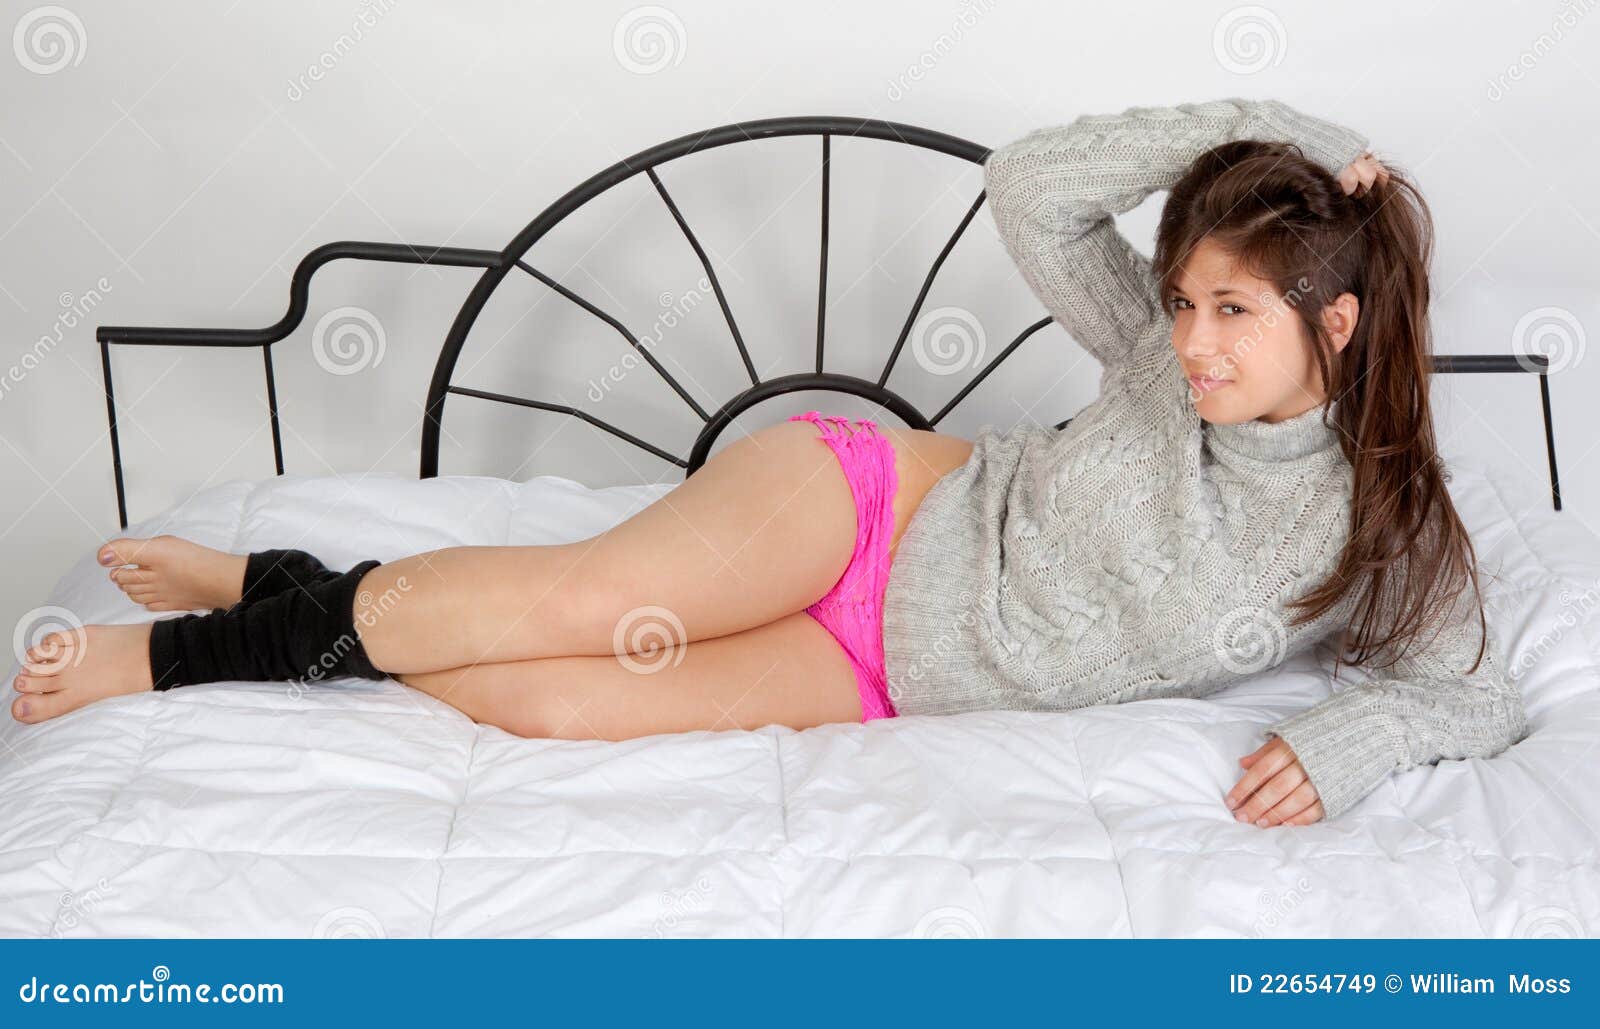 Cute Woman in Leg Warmers and Pink Panties on Bed Stock Image - Image of  happy, college: 22654749